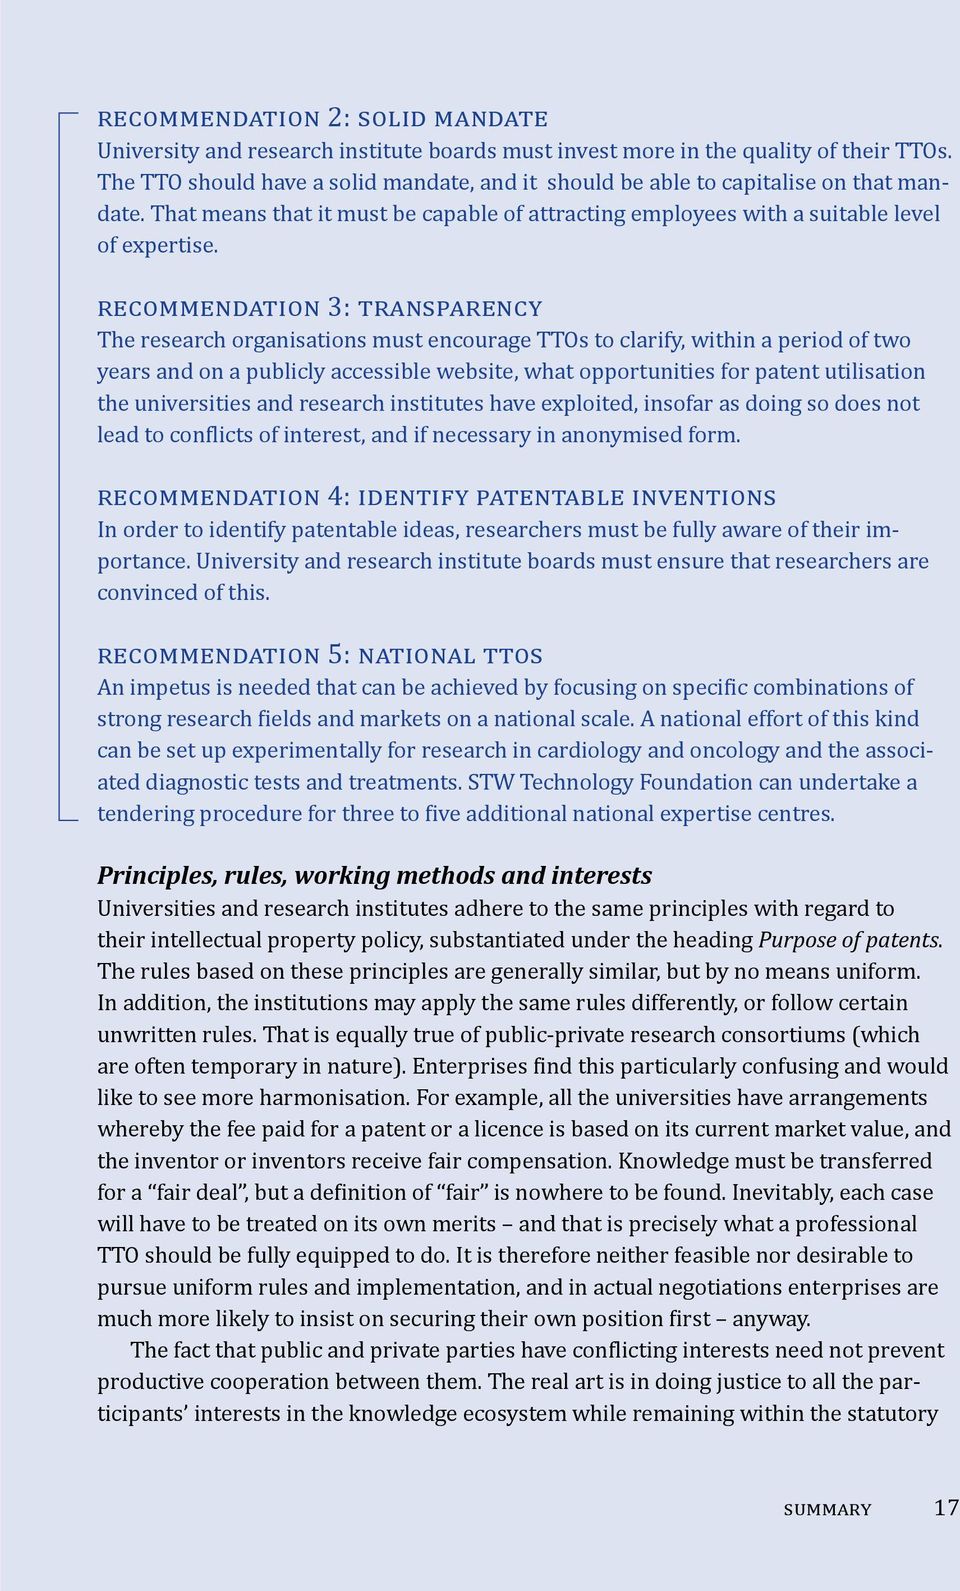 recommendation 3: transparency The research organisations must encourage TTOs to clarify, within a period of two years and on a publicly accessible website, what opportunities for patent utilisation